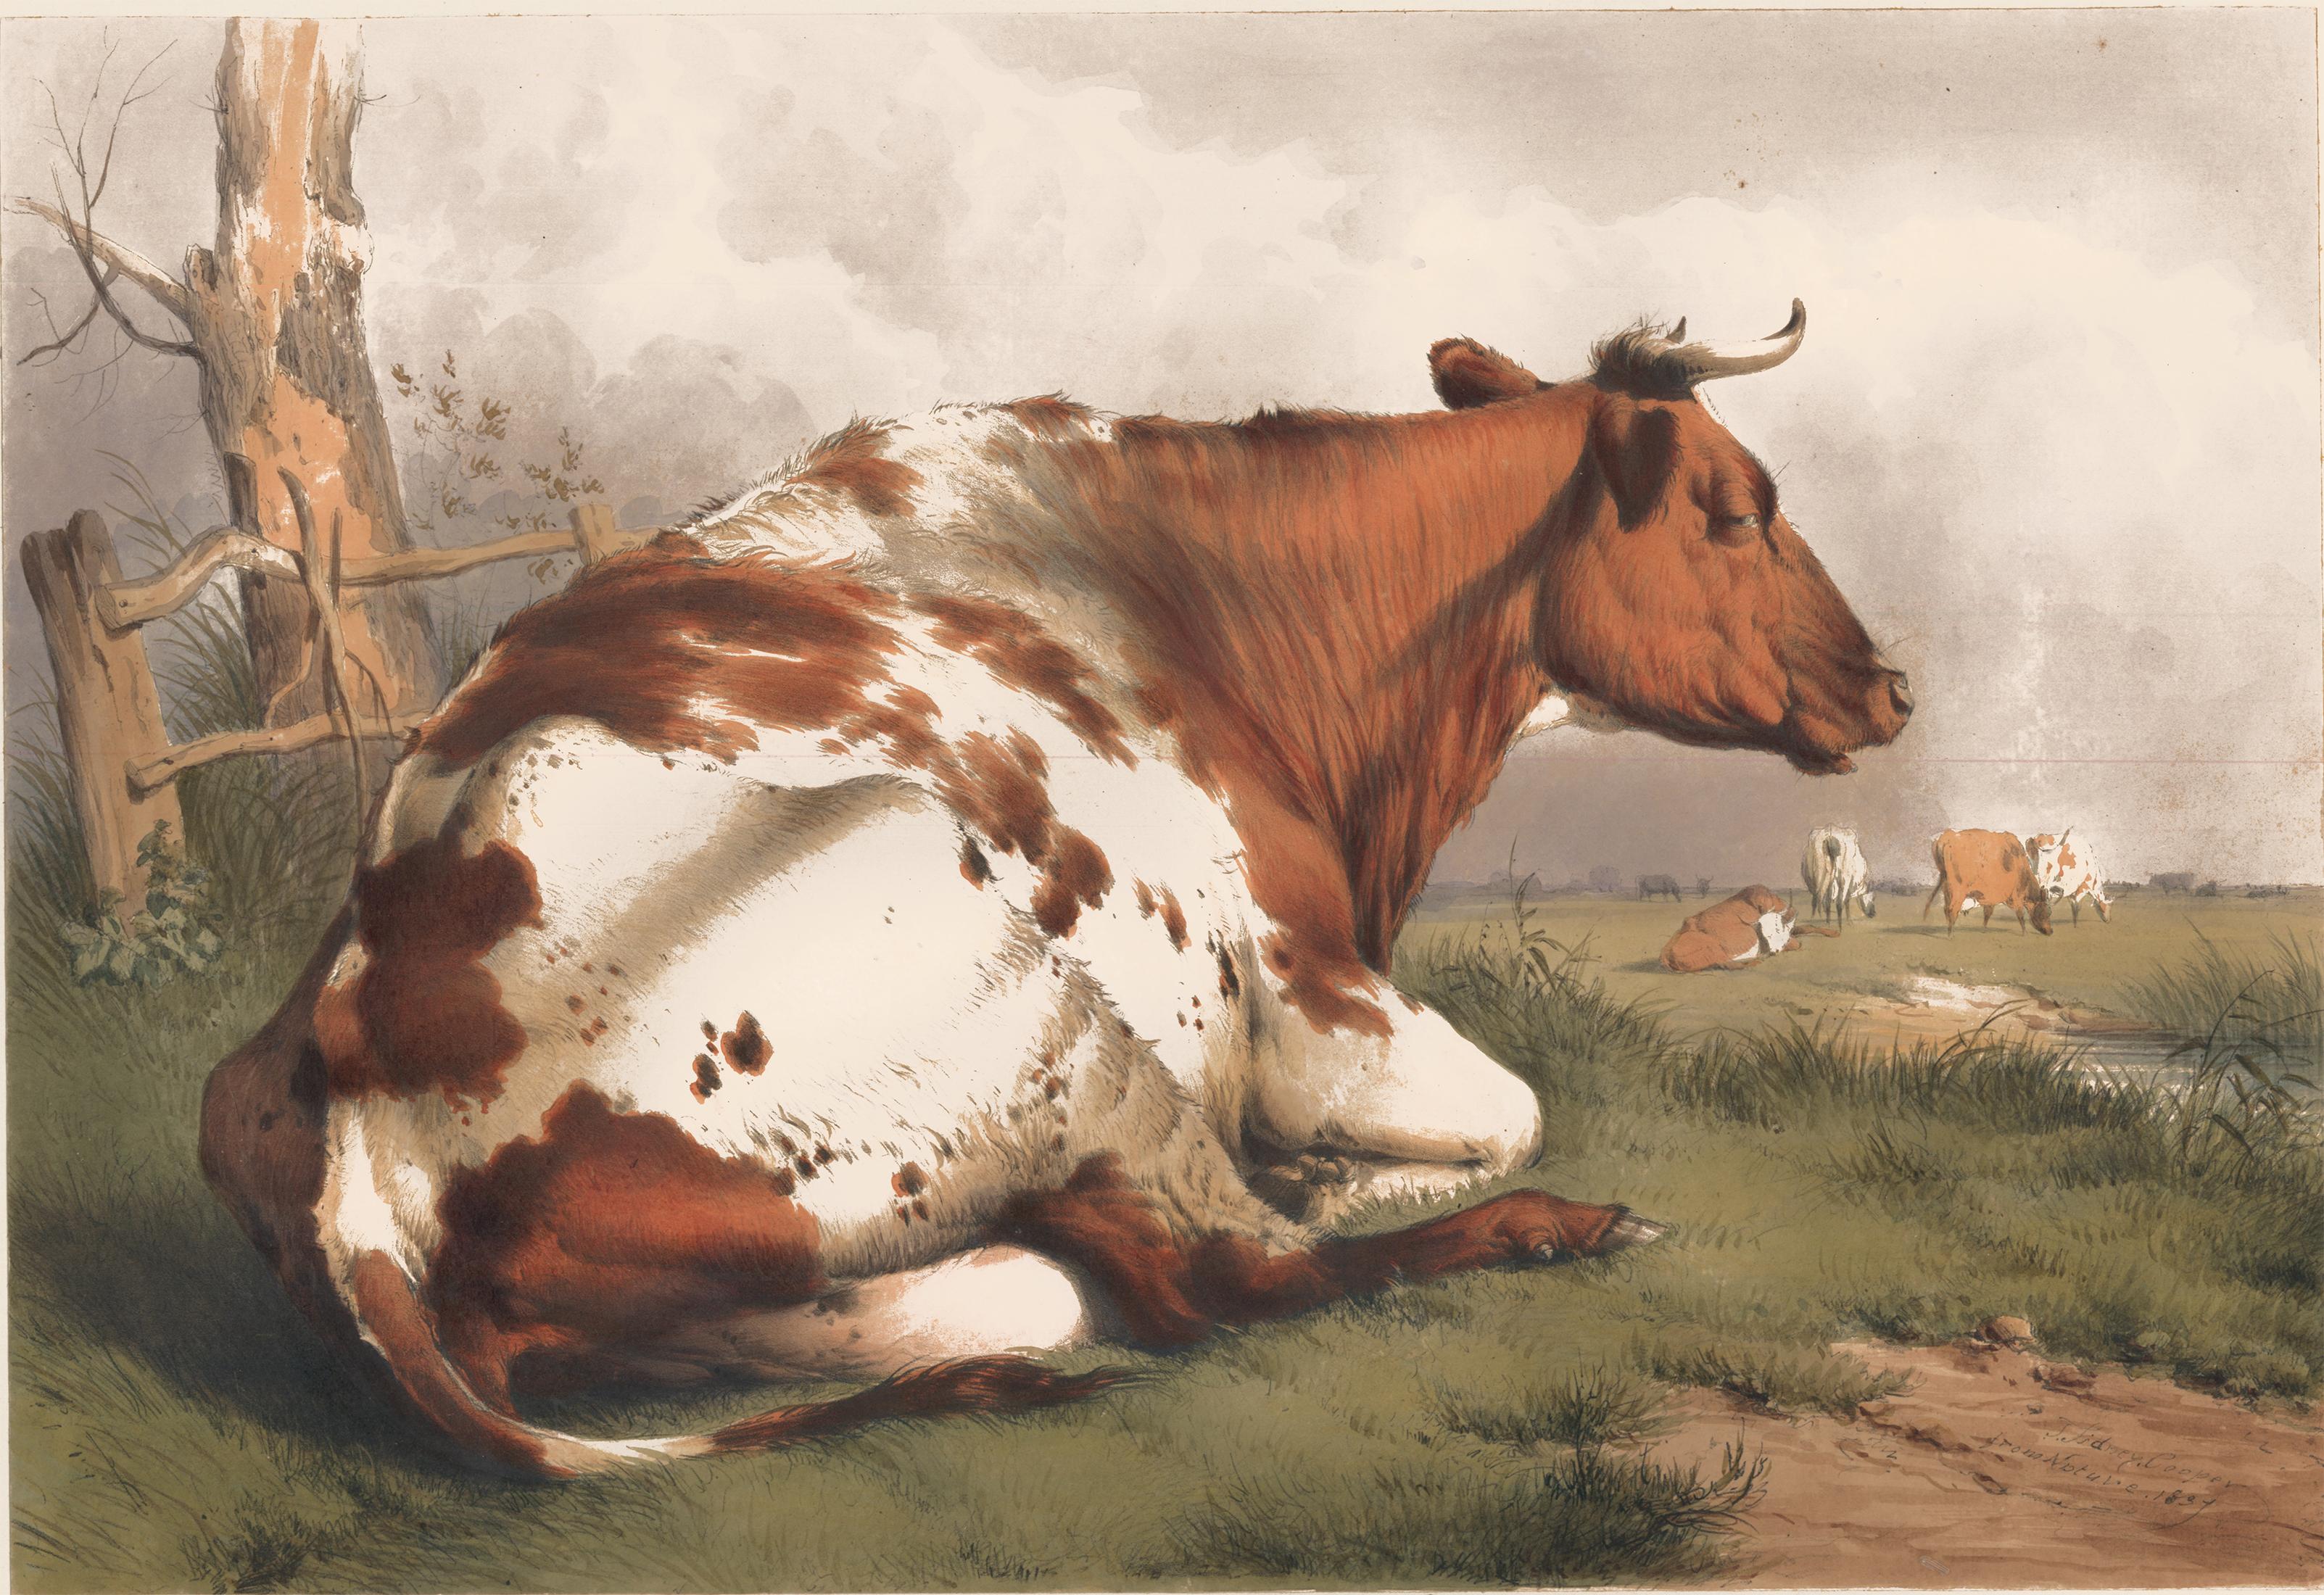 Resting Bull Lithograph - Print by Thomas Sidney Cooper